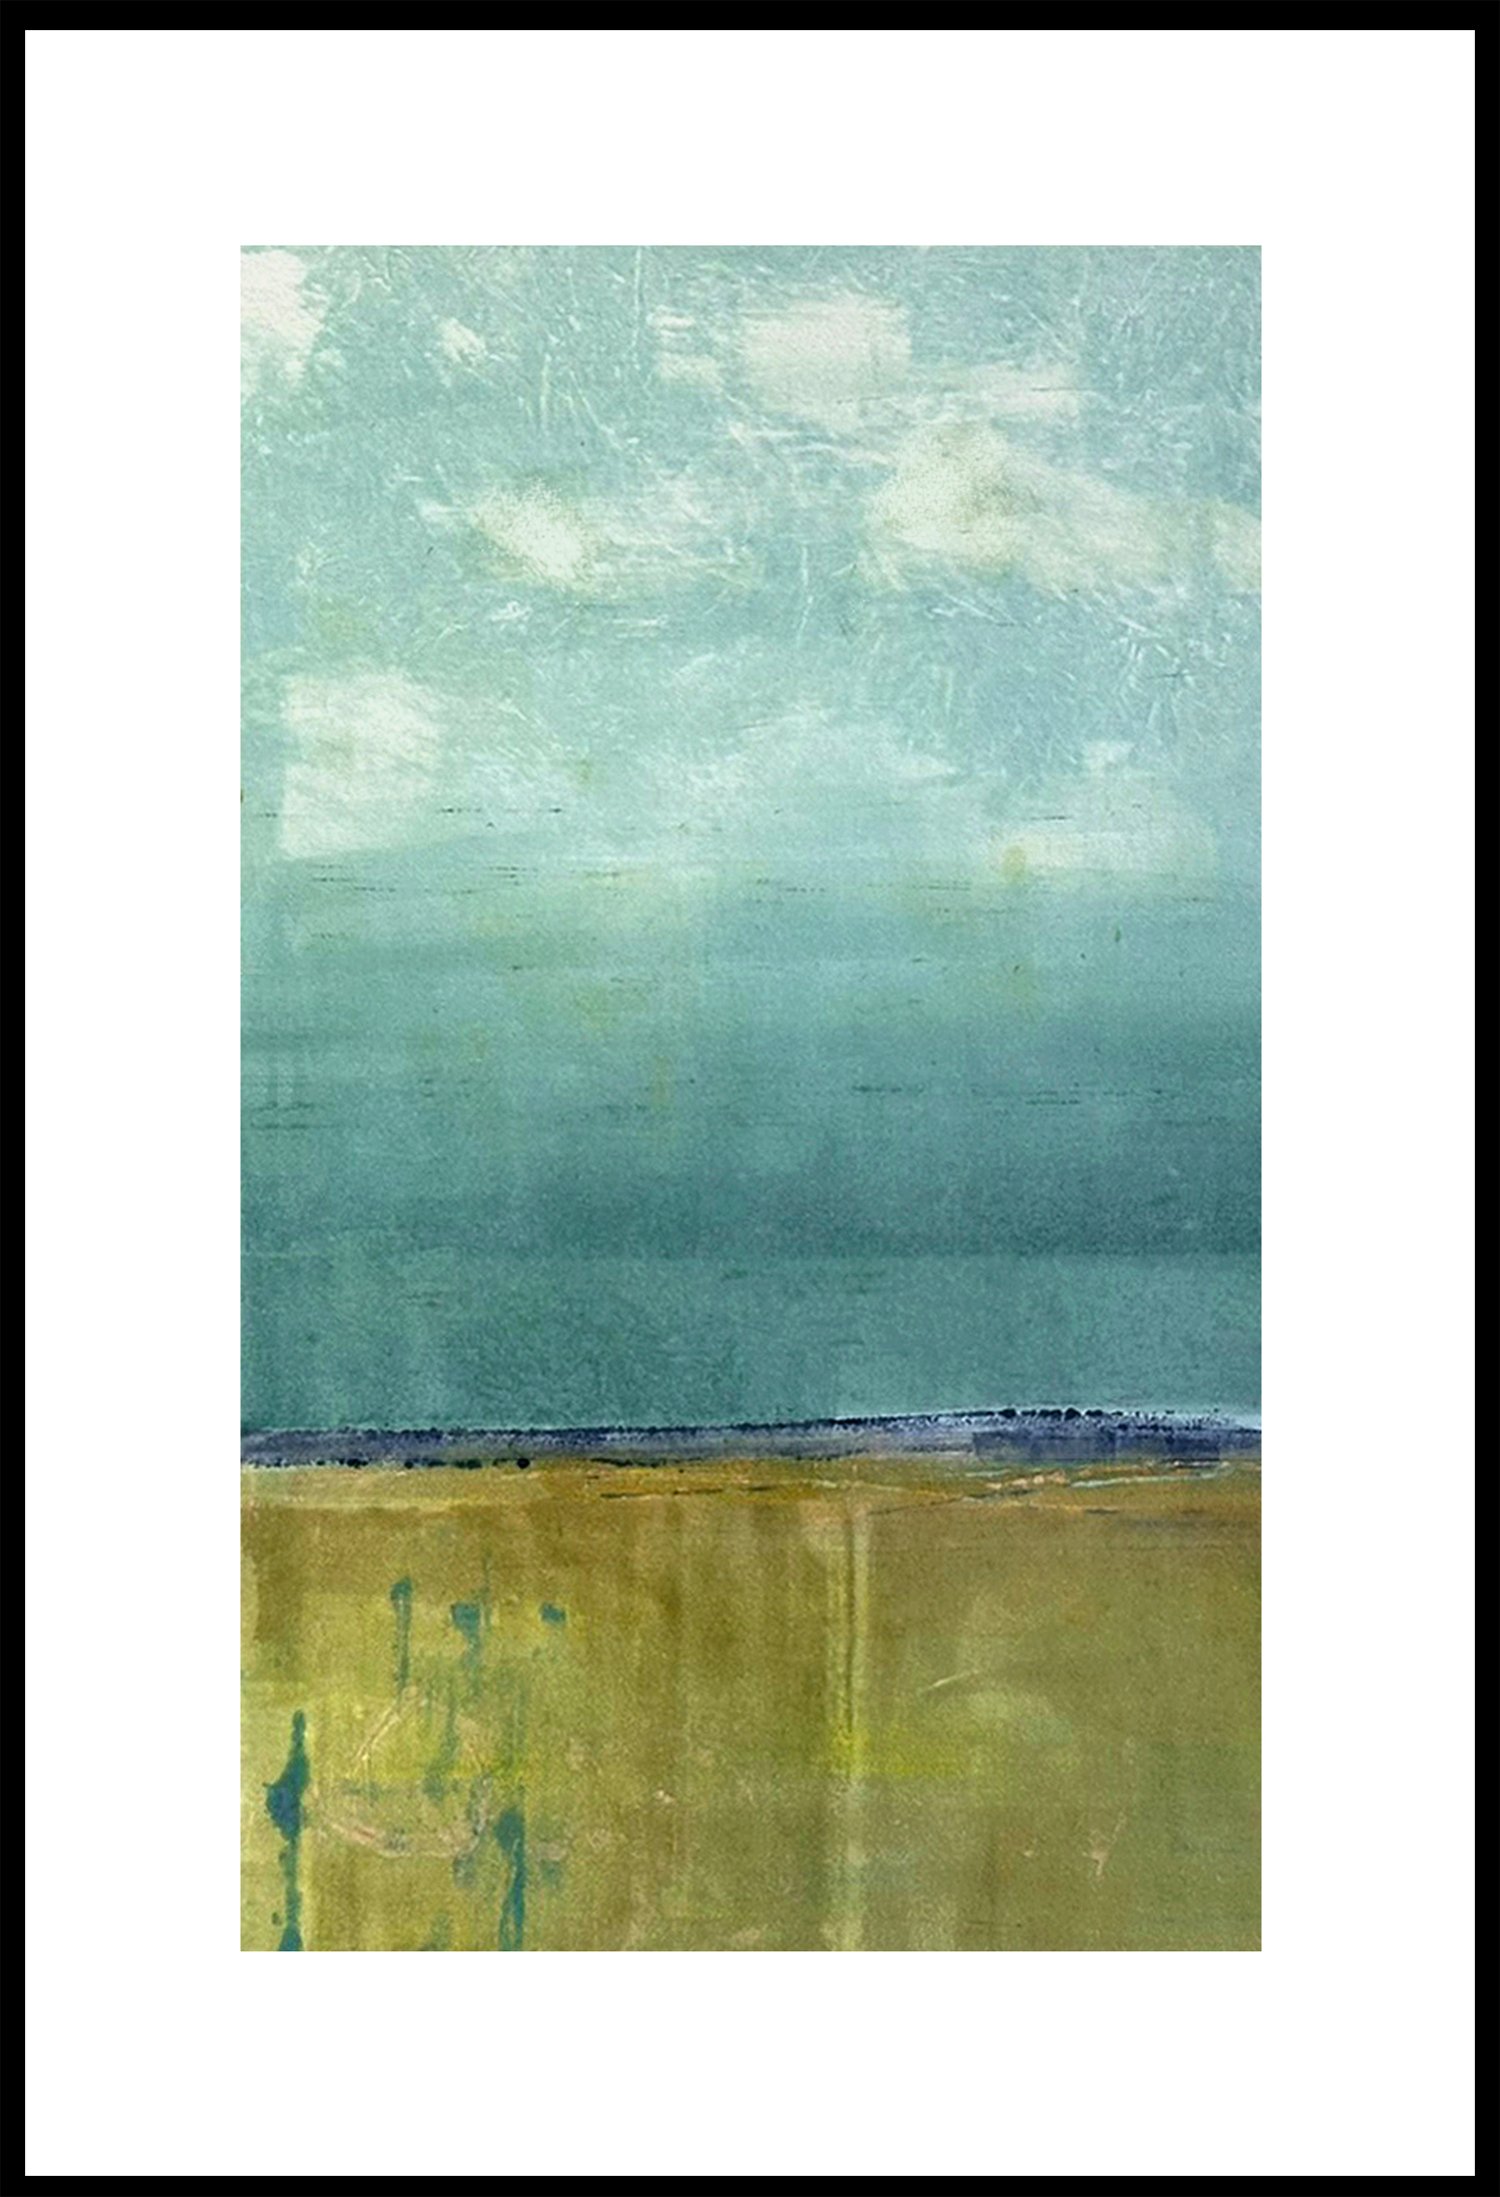   "Late Afternoon"  (image size 14.75 x 8.25”, presented in slim gold metal frame 20.5 x 12.75”). Awash in the warm glow of a late afternoon sun, this monotype captures the serenity of a rural landscape hinting at fields swaying in the fading light w